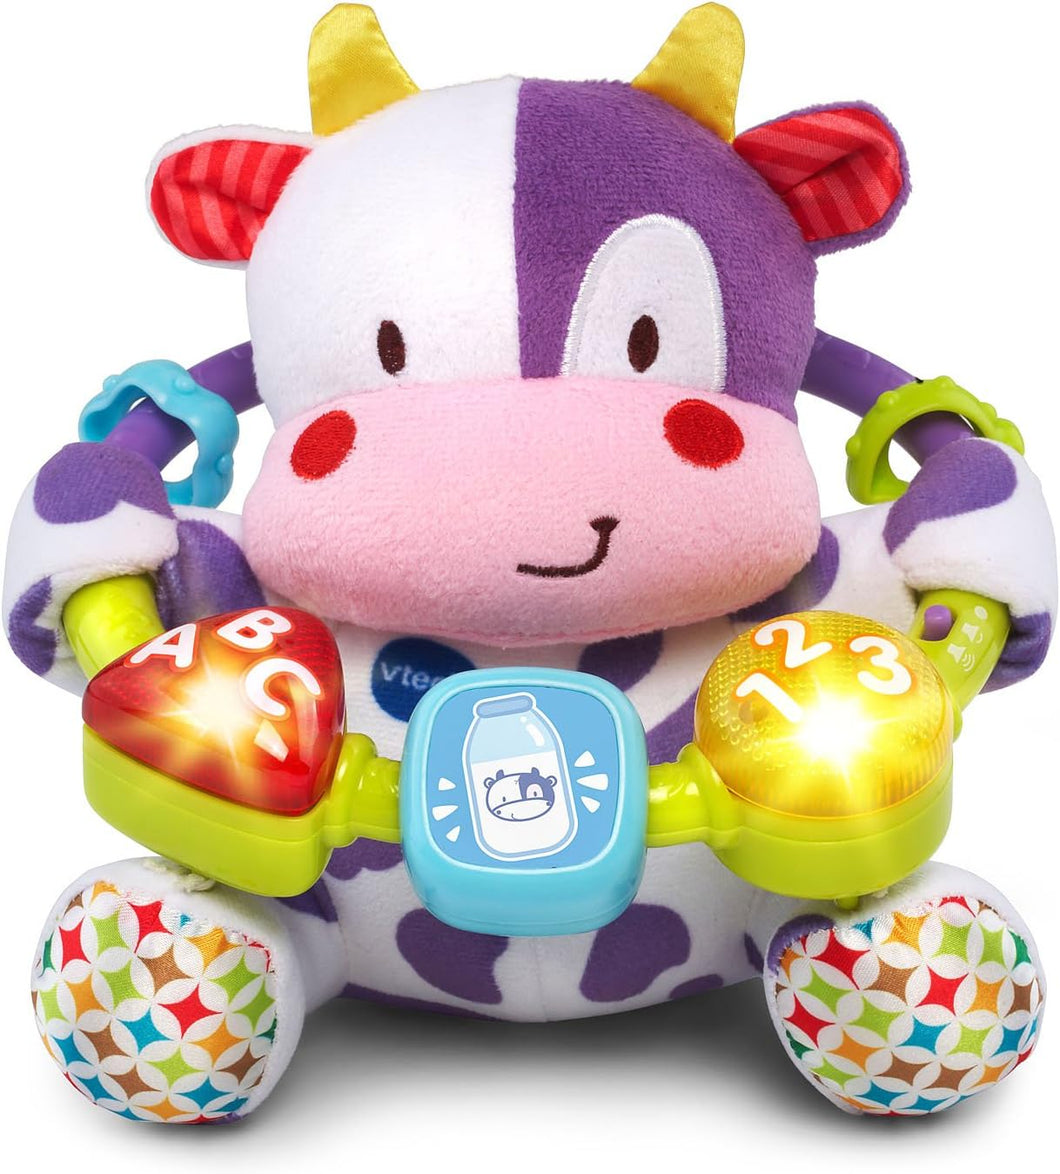 VTech Baby Lil' Critters Moosical Beads Amazon Exclusive, Purple Small, 3-24 Months